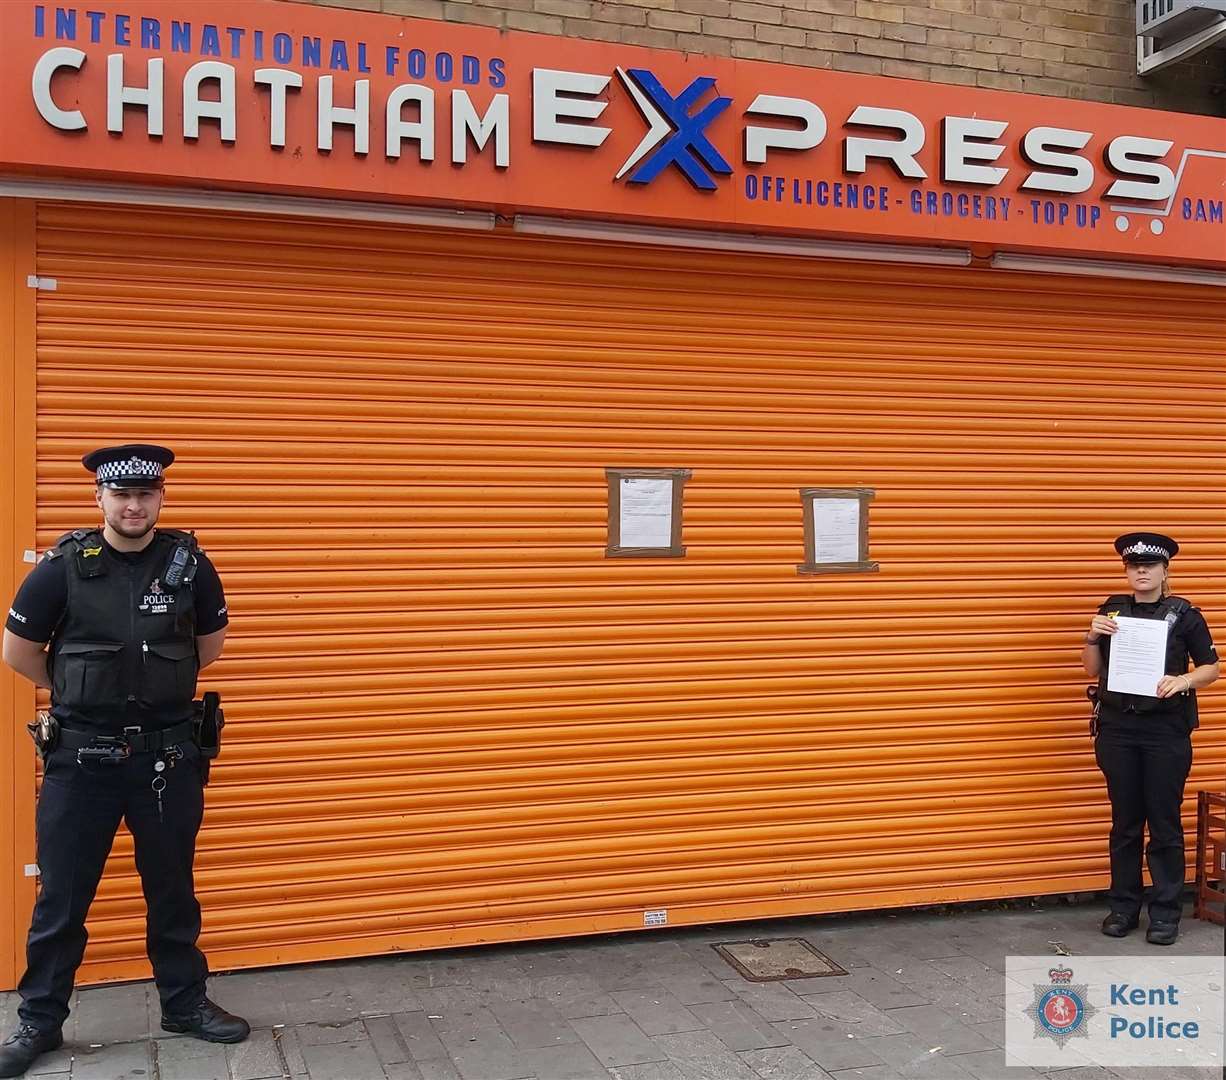 The Chatham Express store in the town's High Street has been shut following a court order. Picture: Kent Police